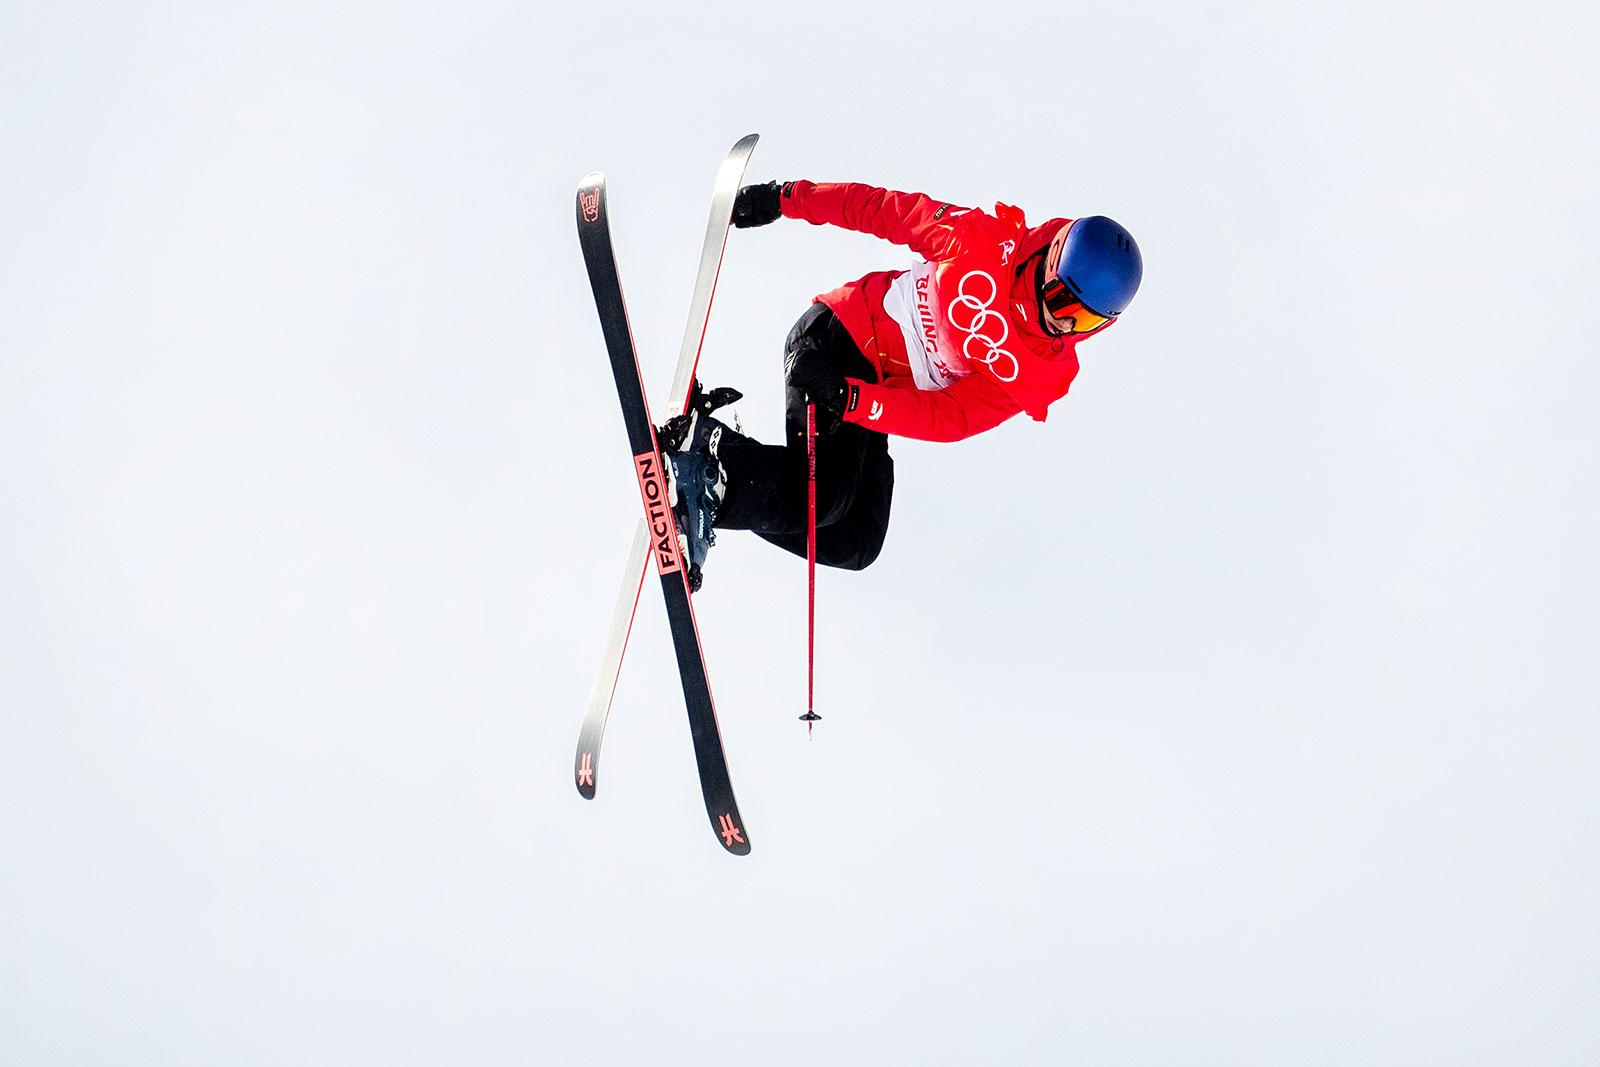 China freestyle skier Eileen Gu performs a trick during the women's slopestyle finals on February 15.